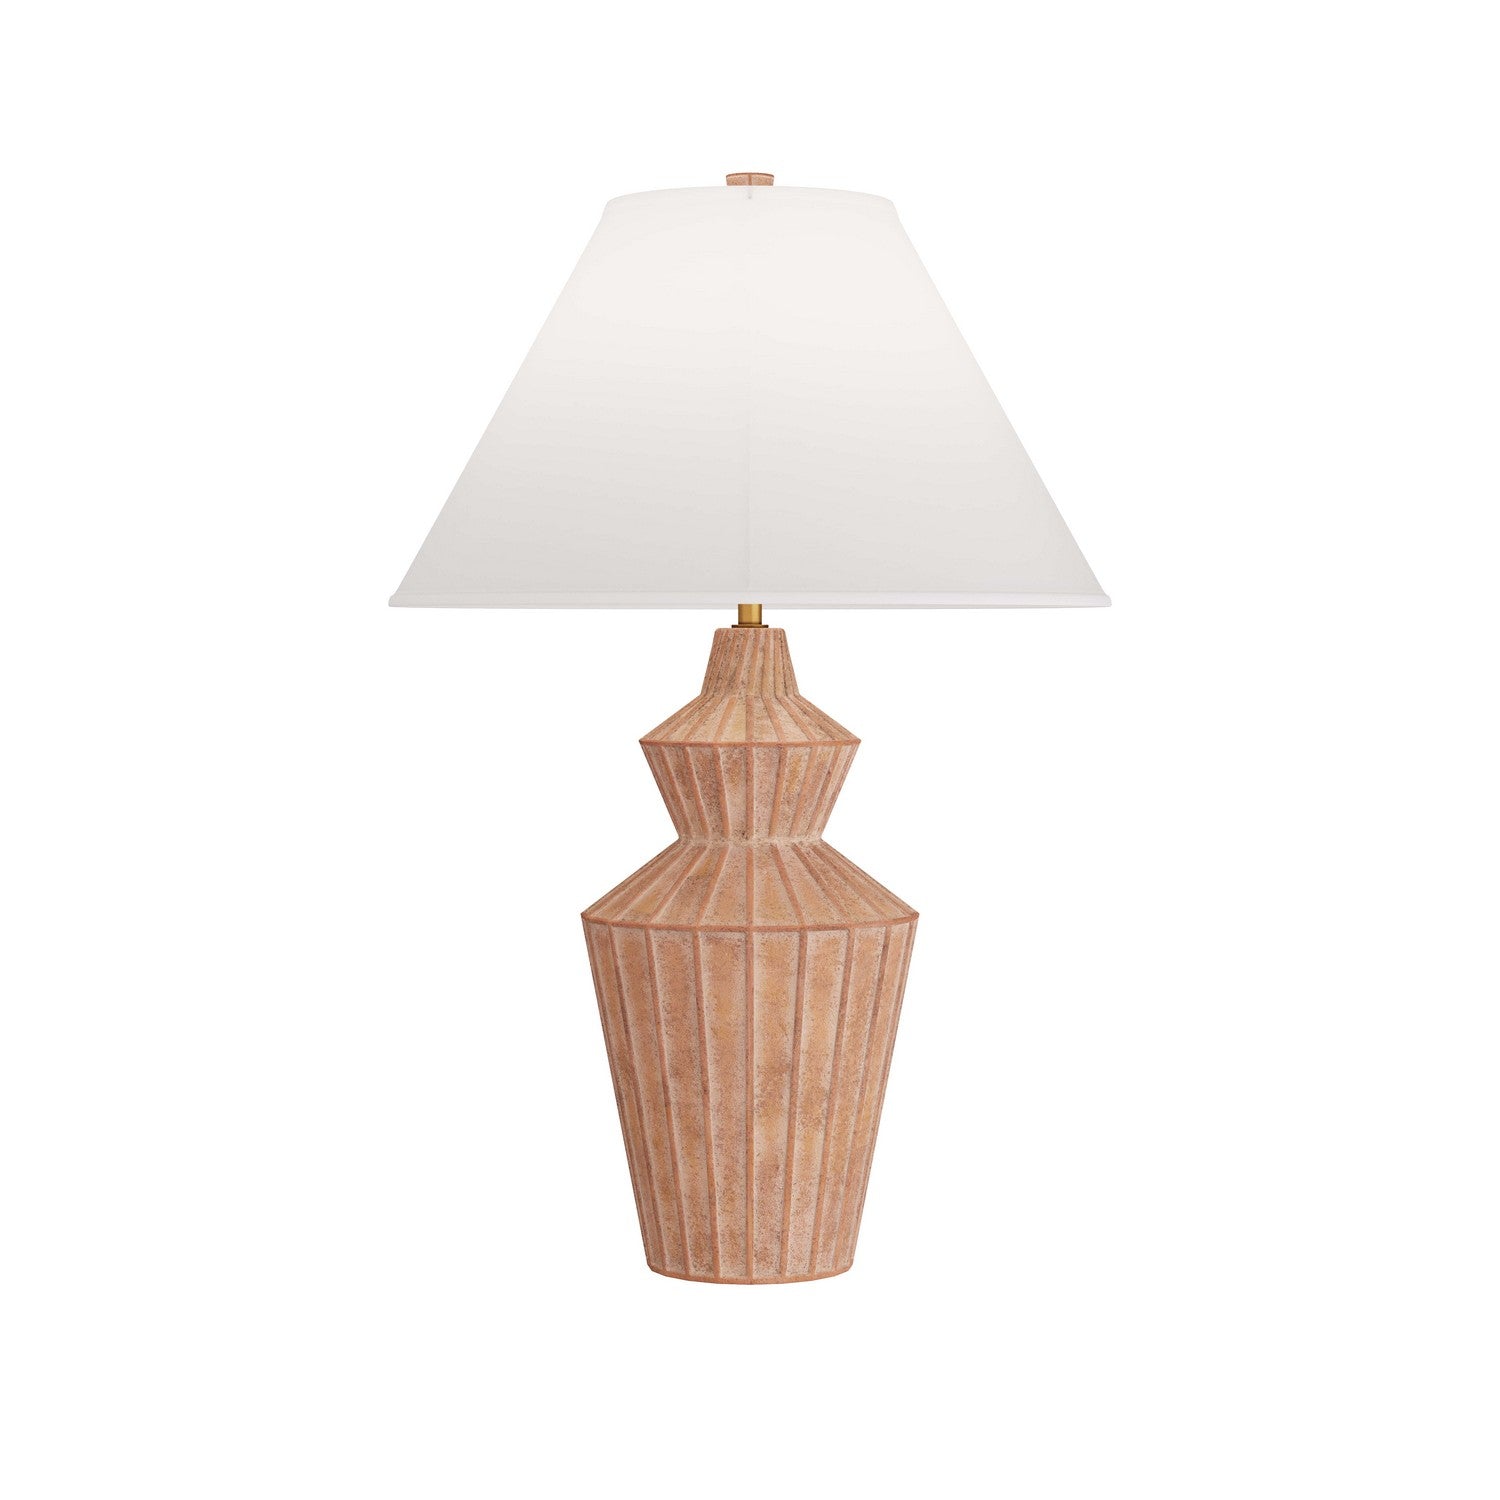 One Light Table Lamp from the Wren collection in White Wash Terracotta finish